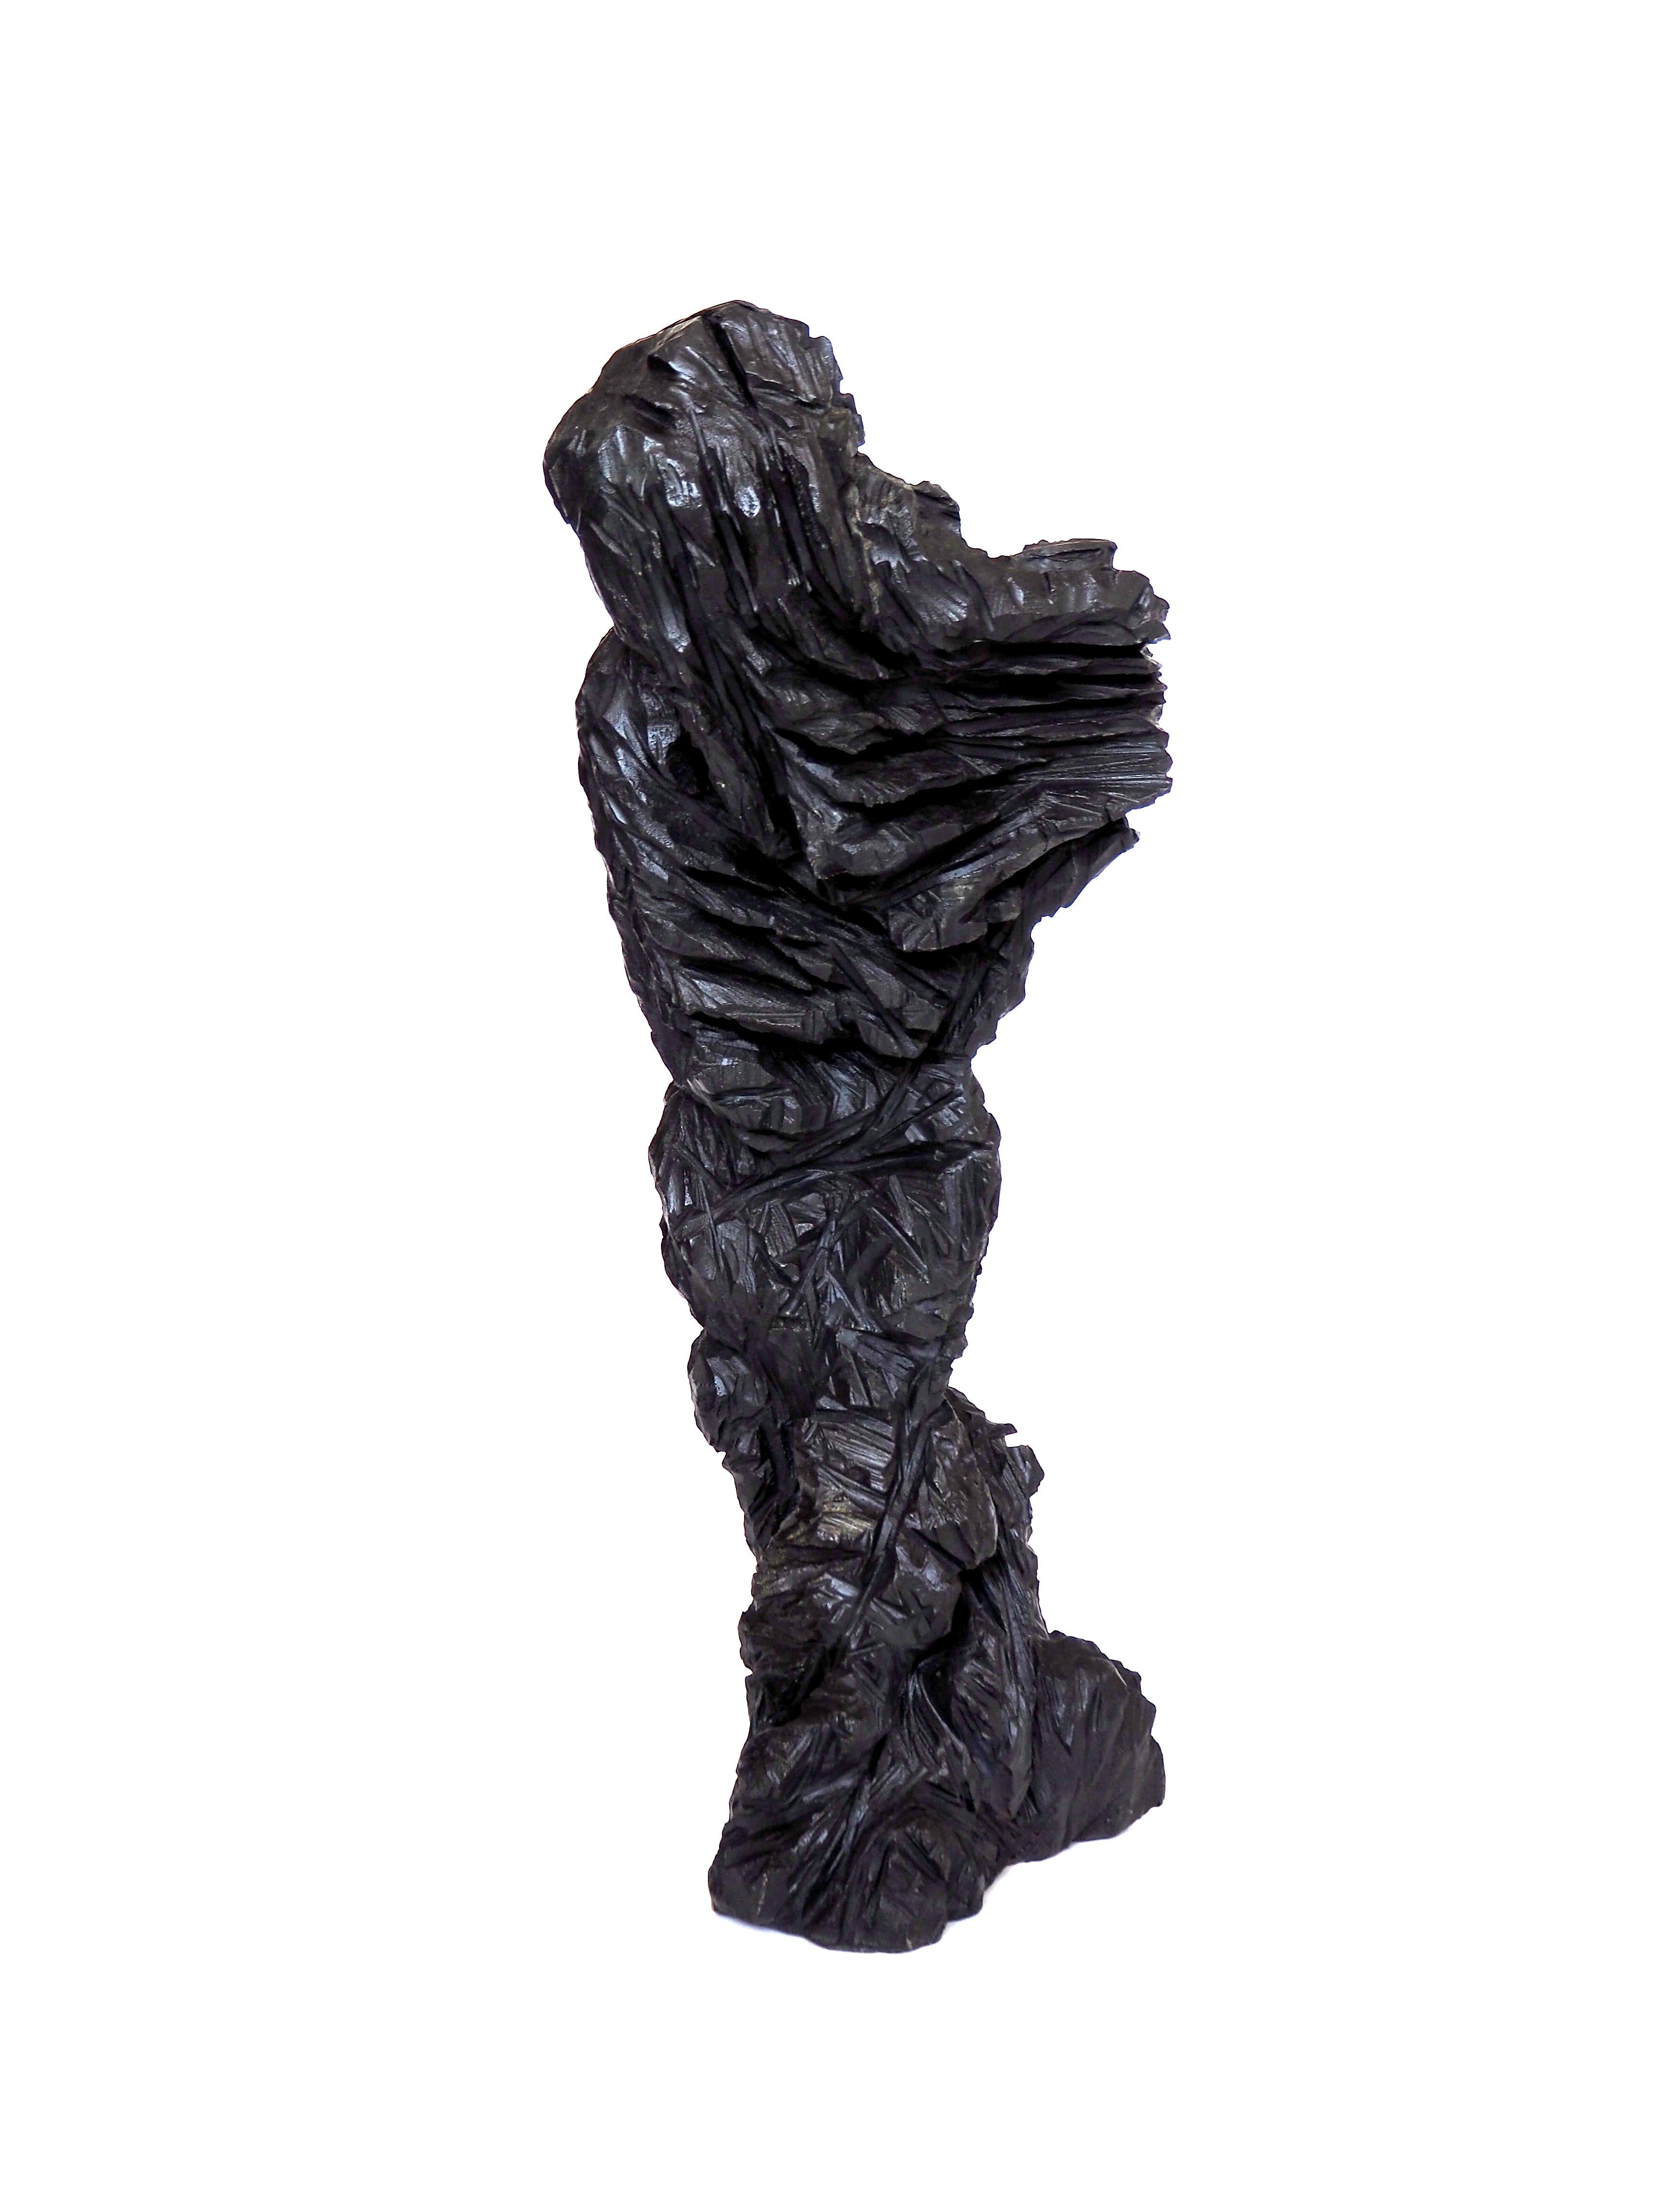 The Other, Contemporary Original Bronze Sculpture by Artist Jonathan Roson For Sale 4